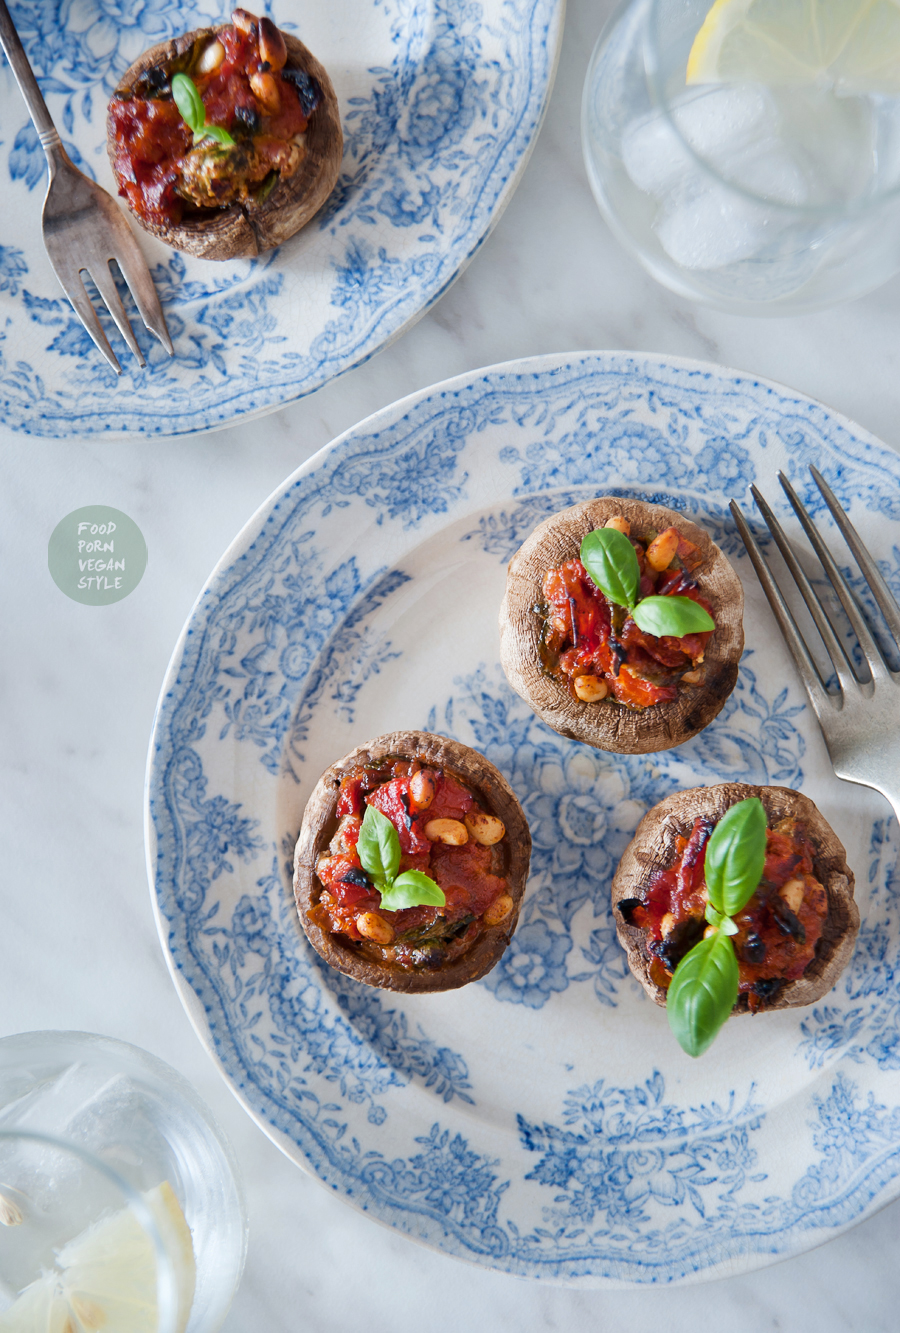 Baked stuffed mushrooms with sun-dried tomatoes, basil and pine nuts